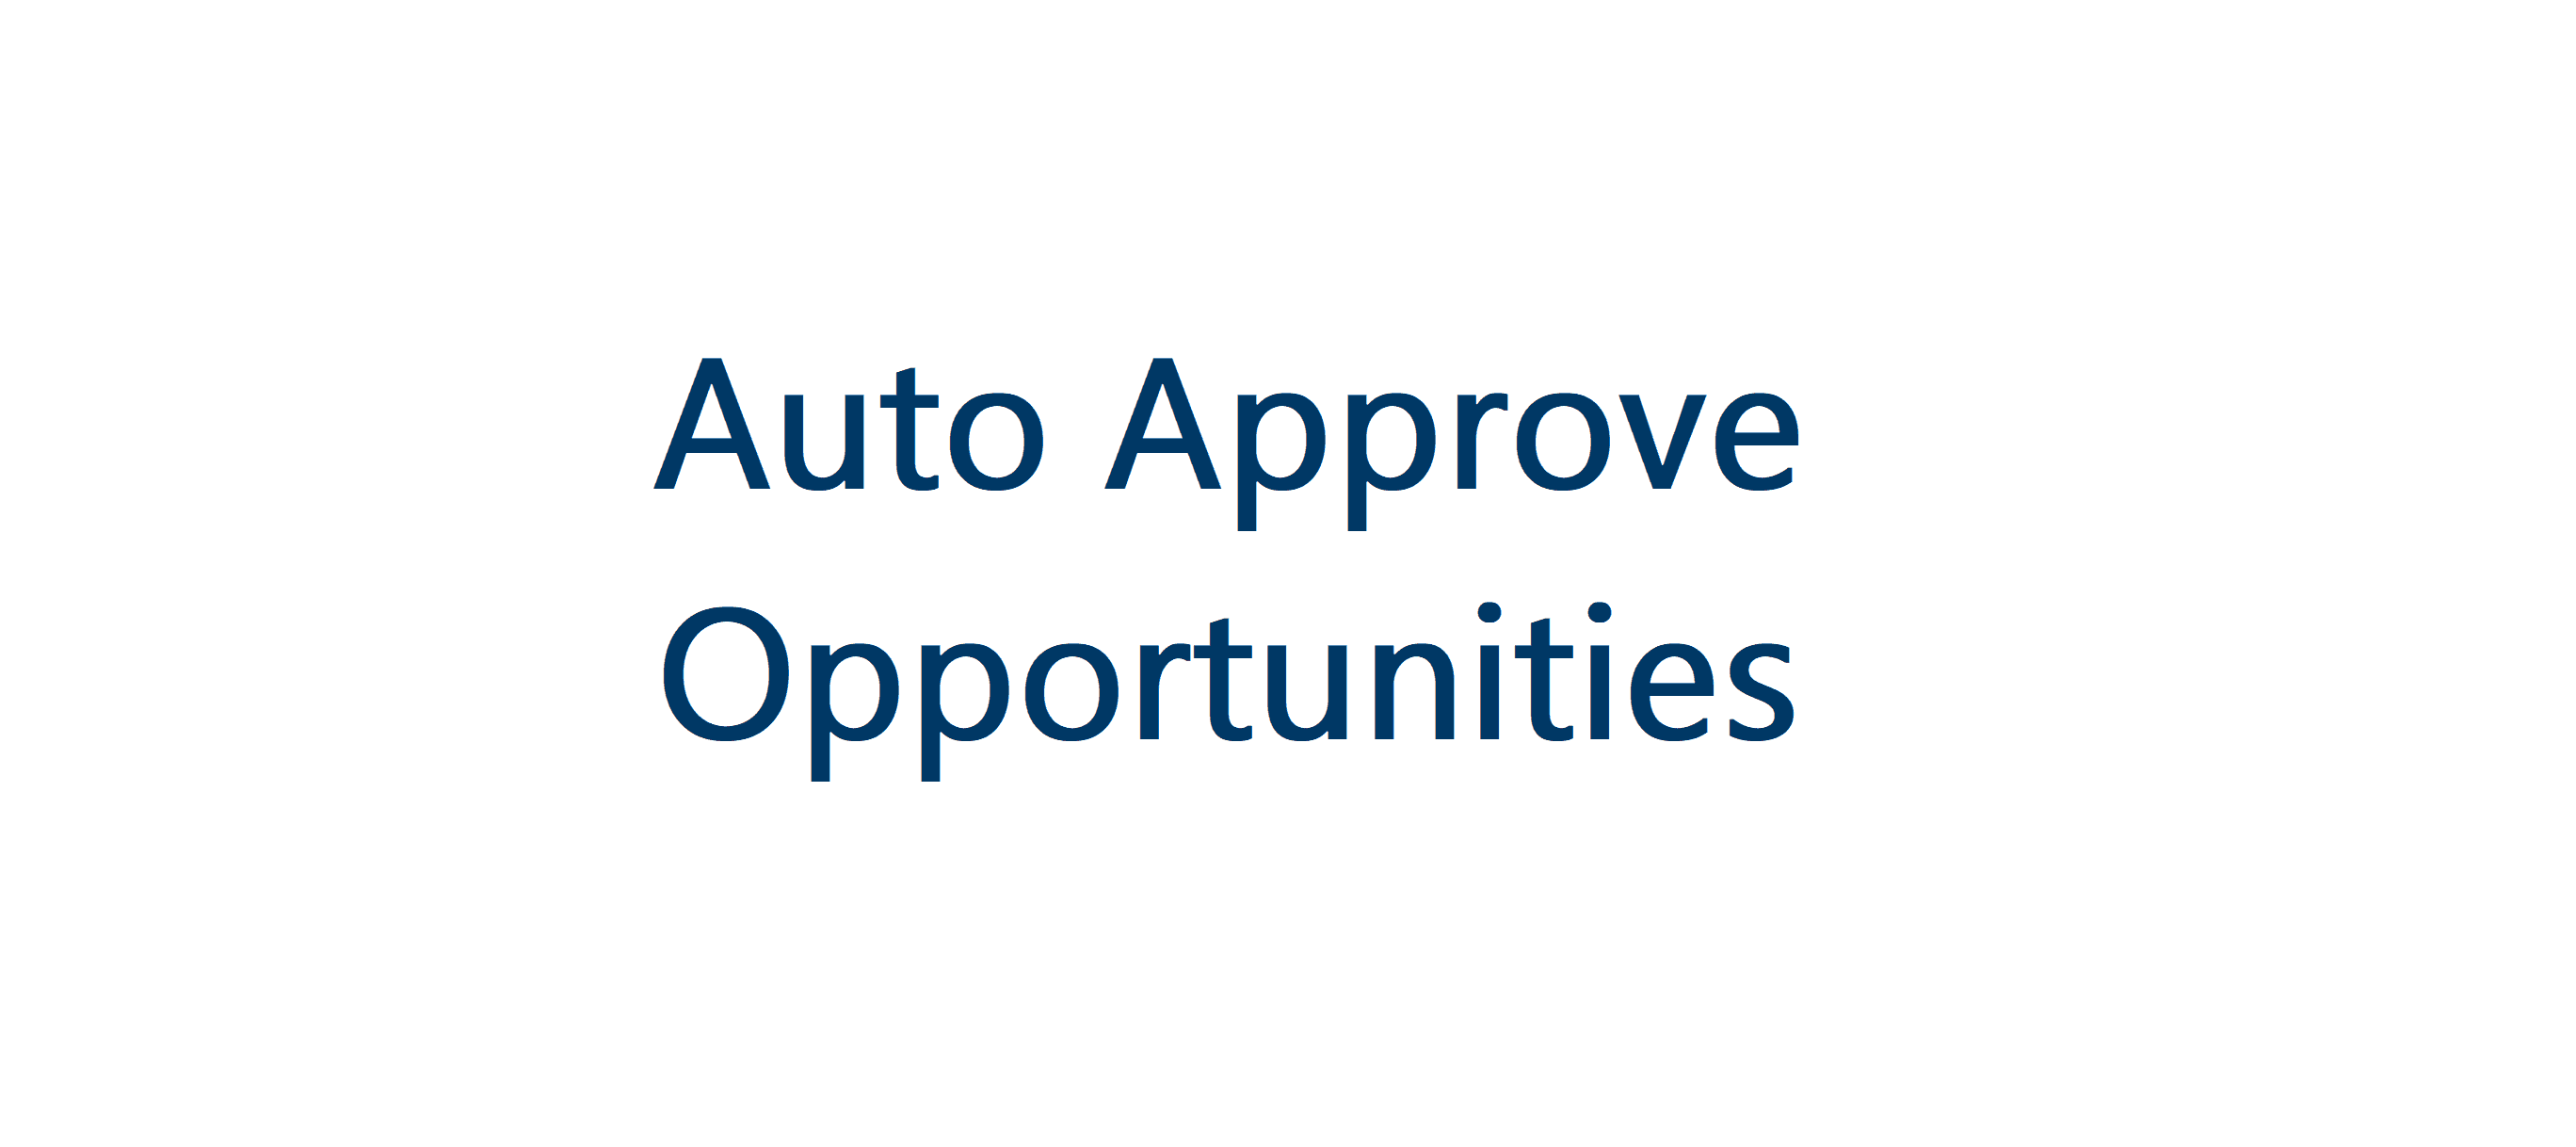 Auto Approve Opportunities